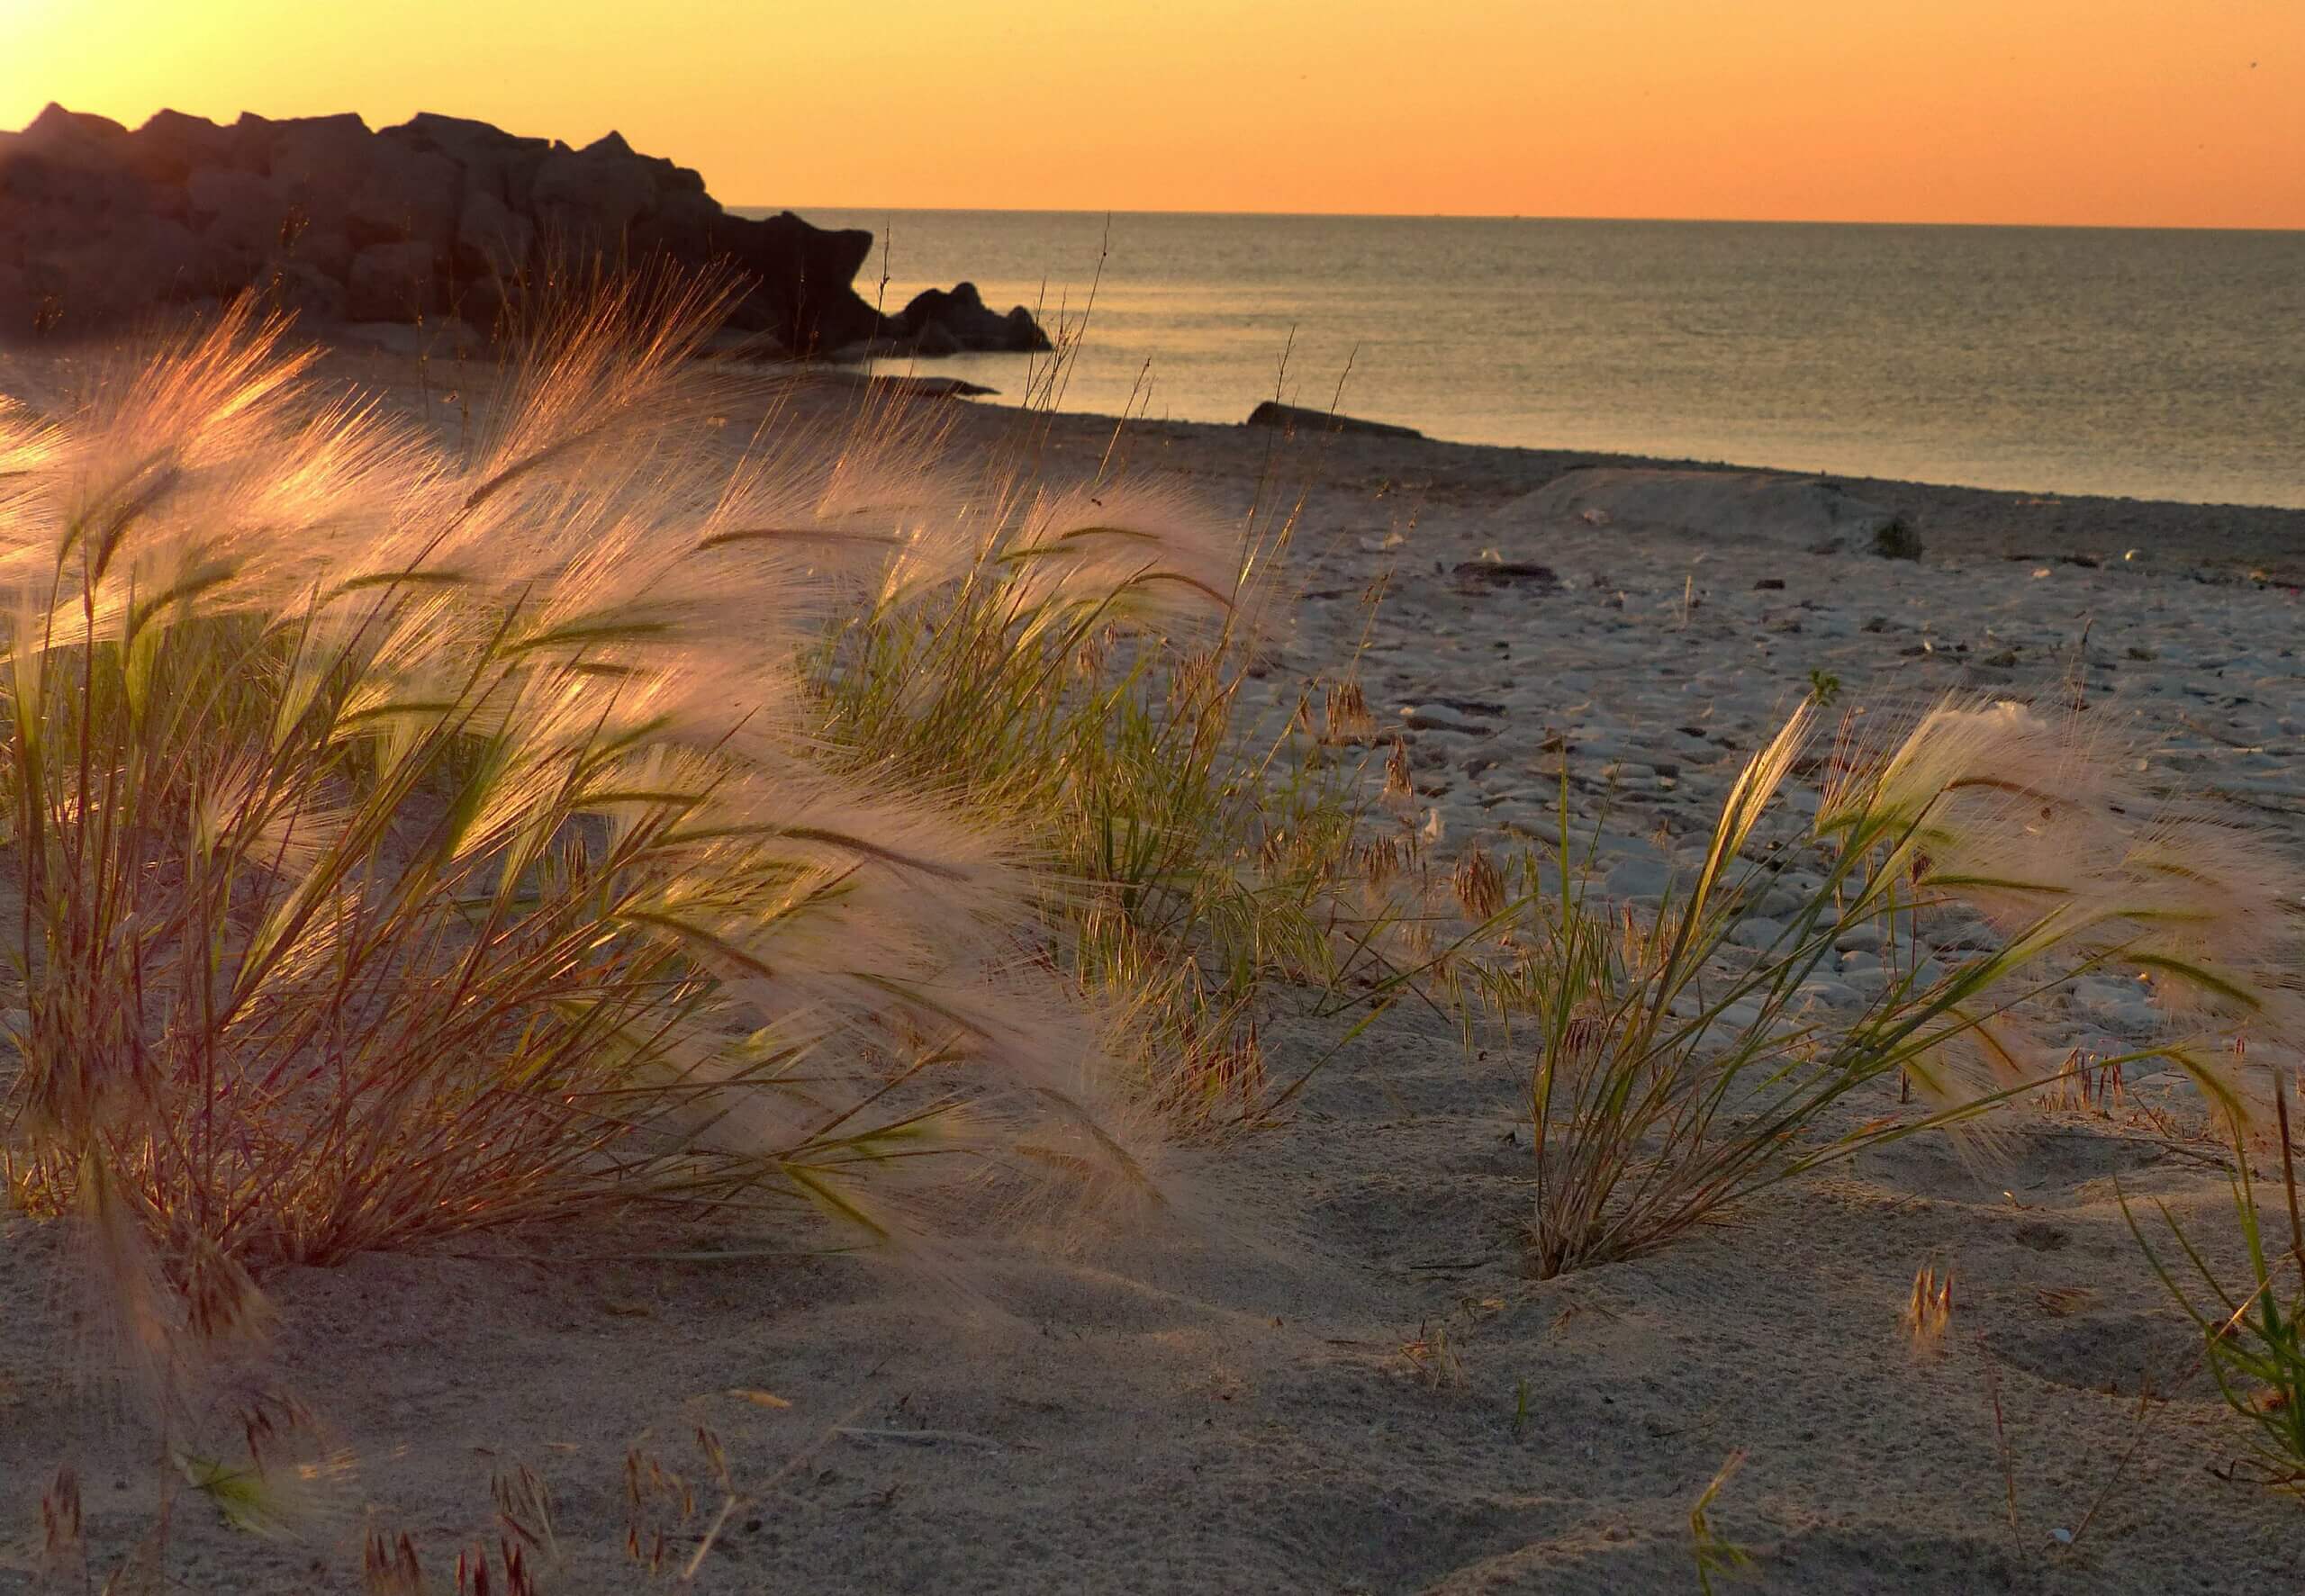 Sandy and rocky shoreline of Lake Michigan with scrub grass at dawn.